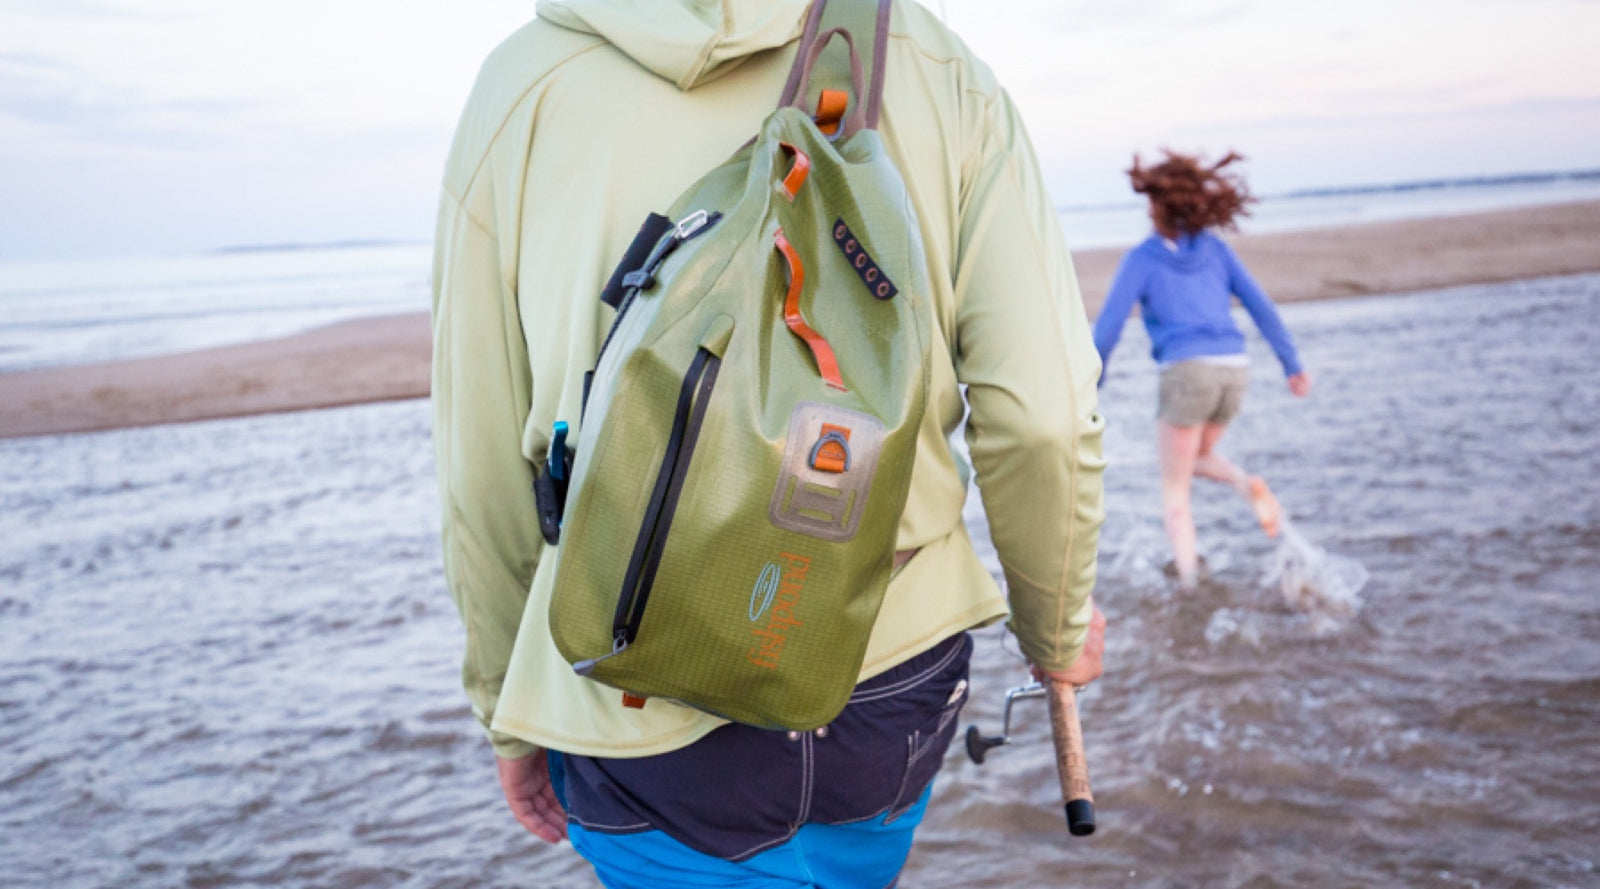 Fly Fishing Gear Review: The Tough and Waterproof Fishpond